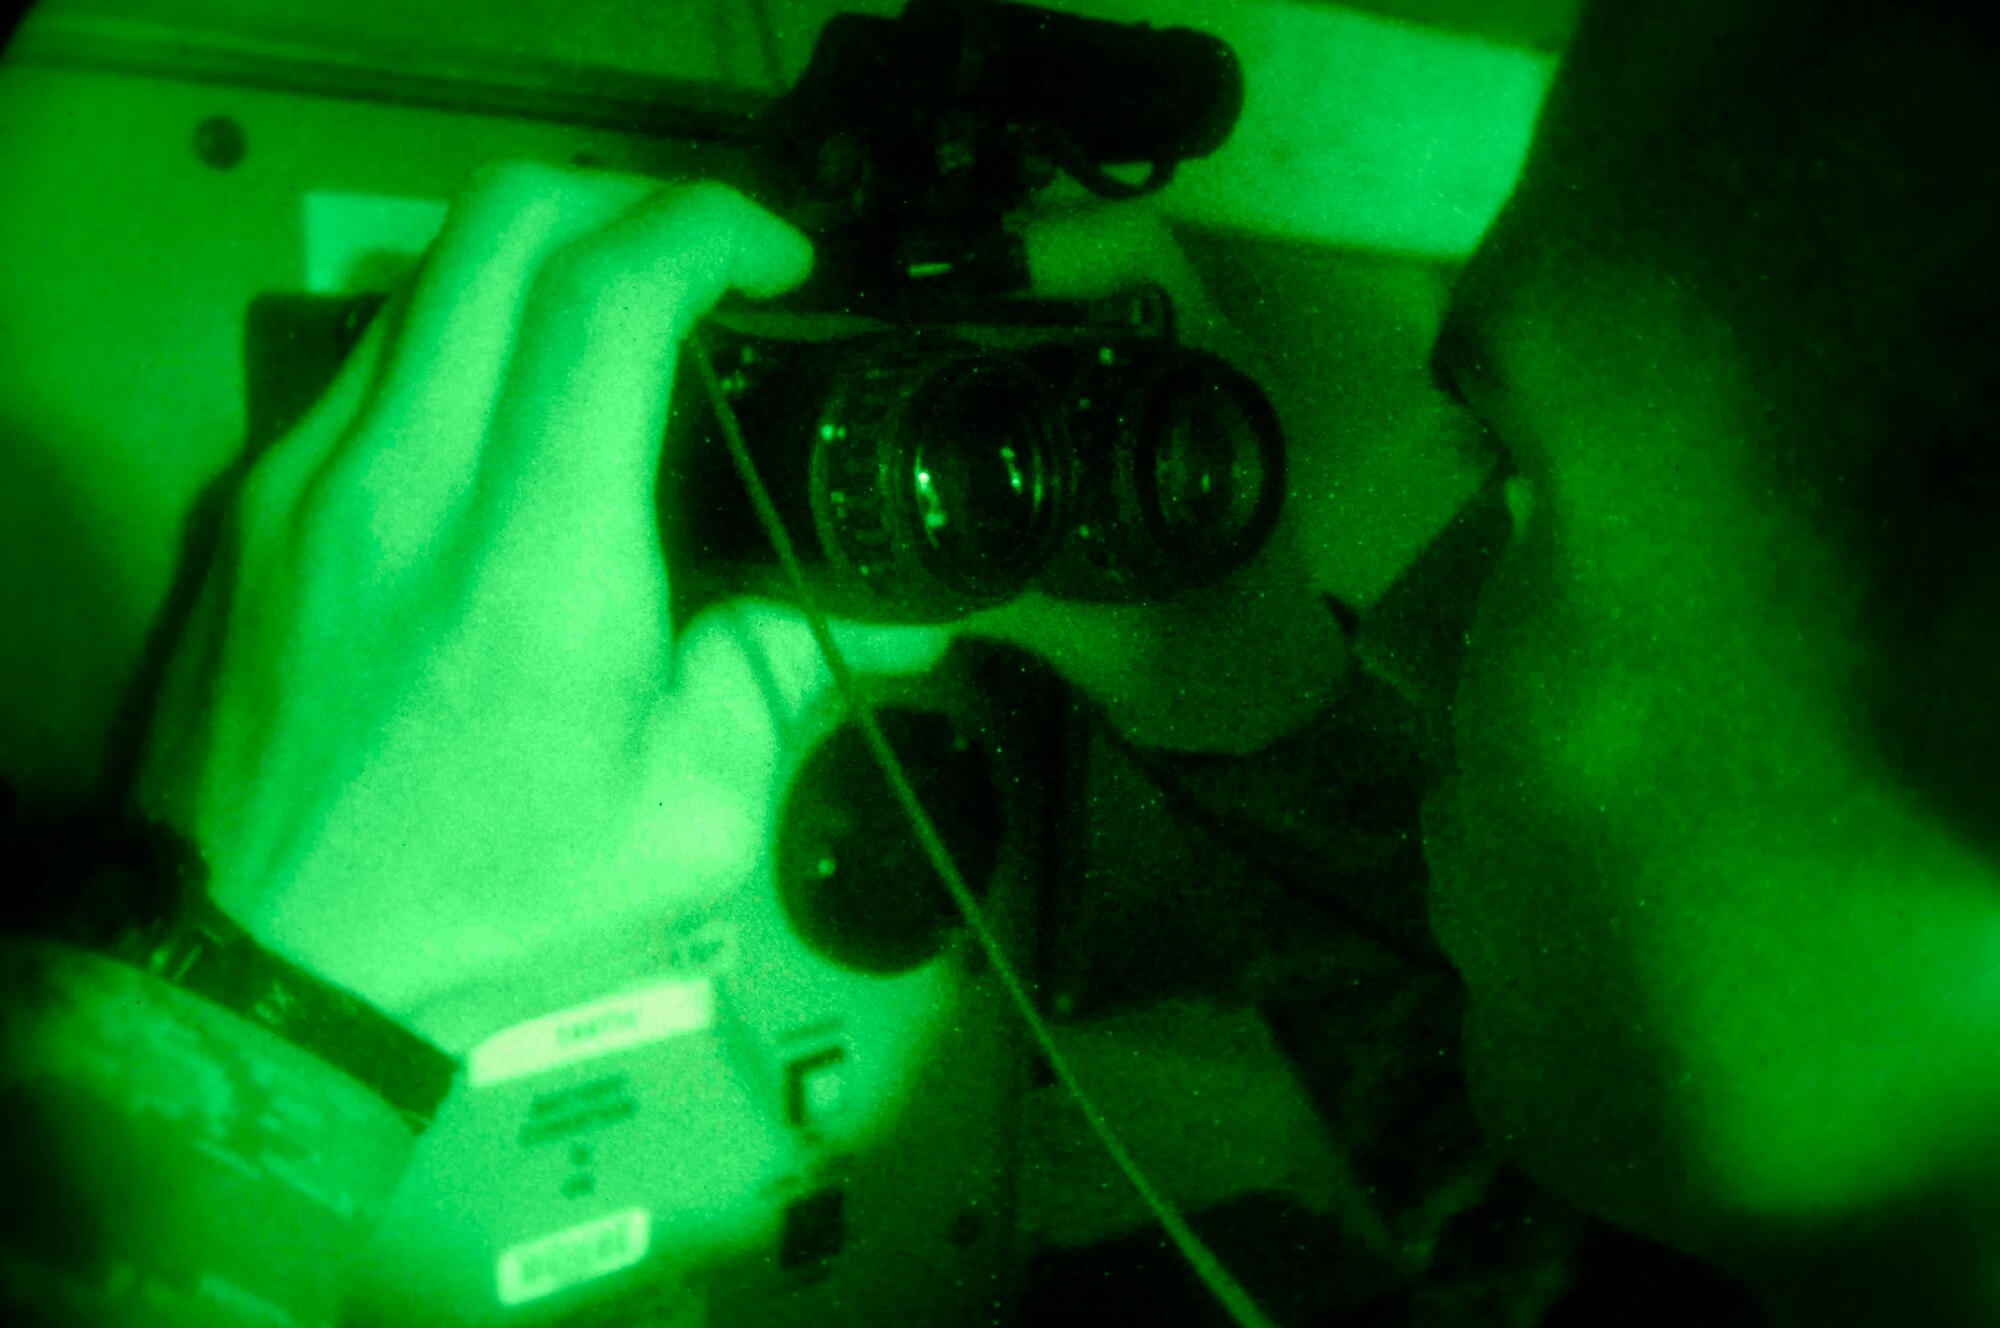 BAGRAM AIR BASE, Afghanistan - Senior Airman Jordan Cassity, an aircrew life support technician with the 774th Expeditionary Airlift Squadron here, checks a pair of night vision goggles in a dark room, Dec. 12, 2007.  (U.S. Air Force photo/Staff Sgt. Joshua T Jasper)  (Released)
